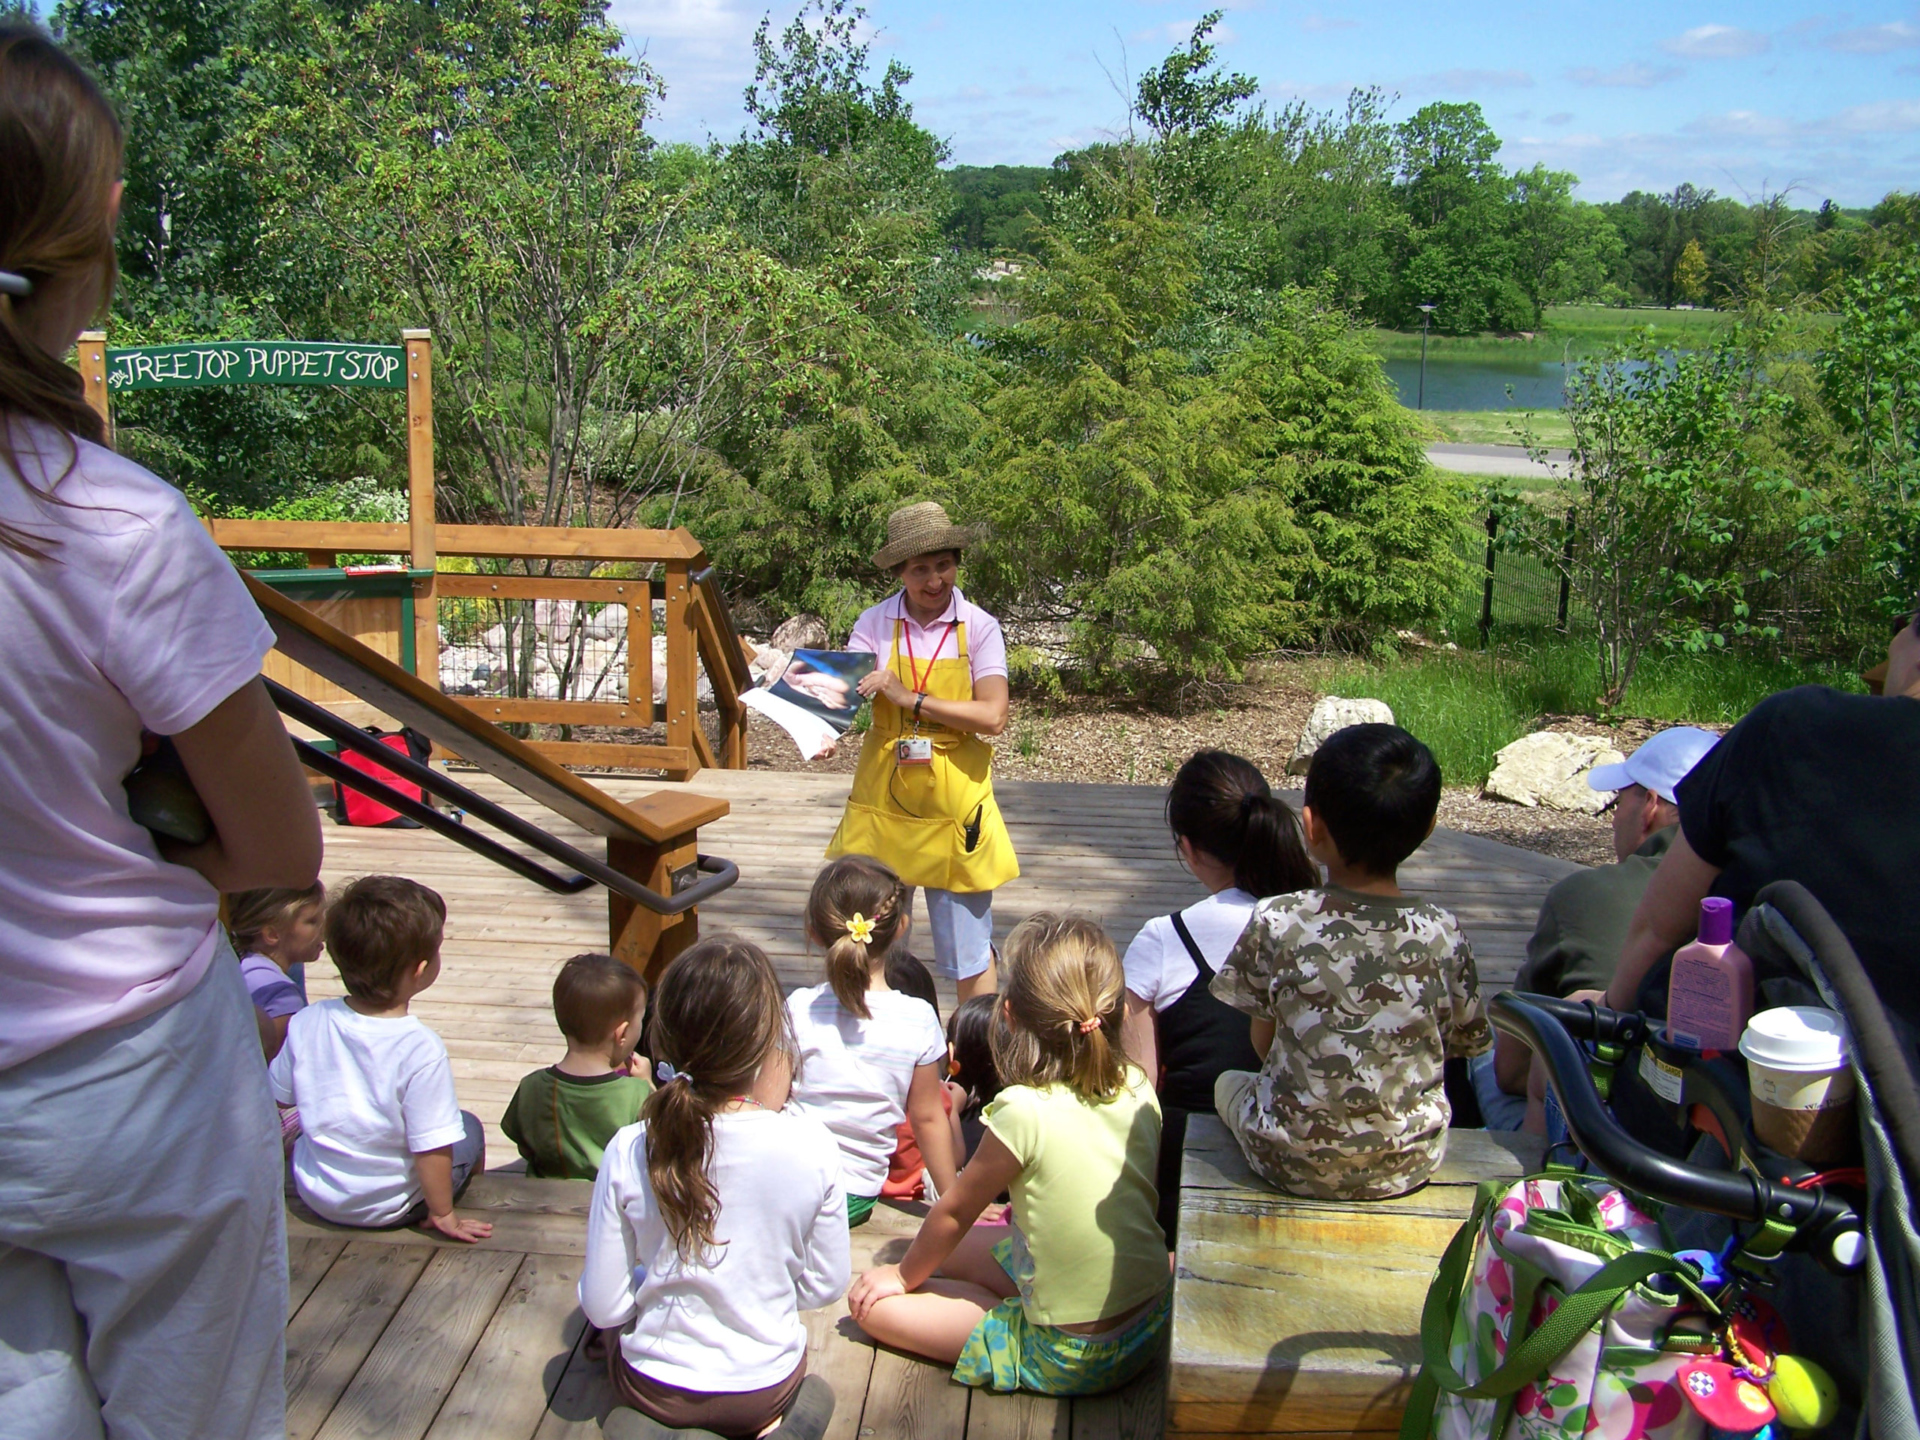 A group of parents and children gathered for story time in the Children's Garden